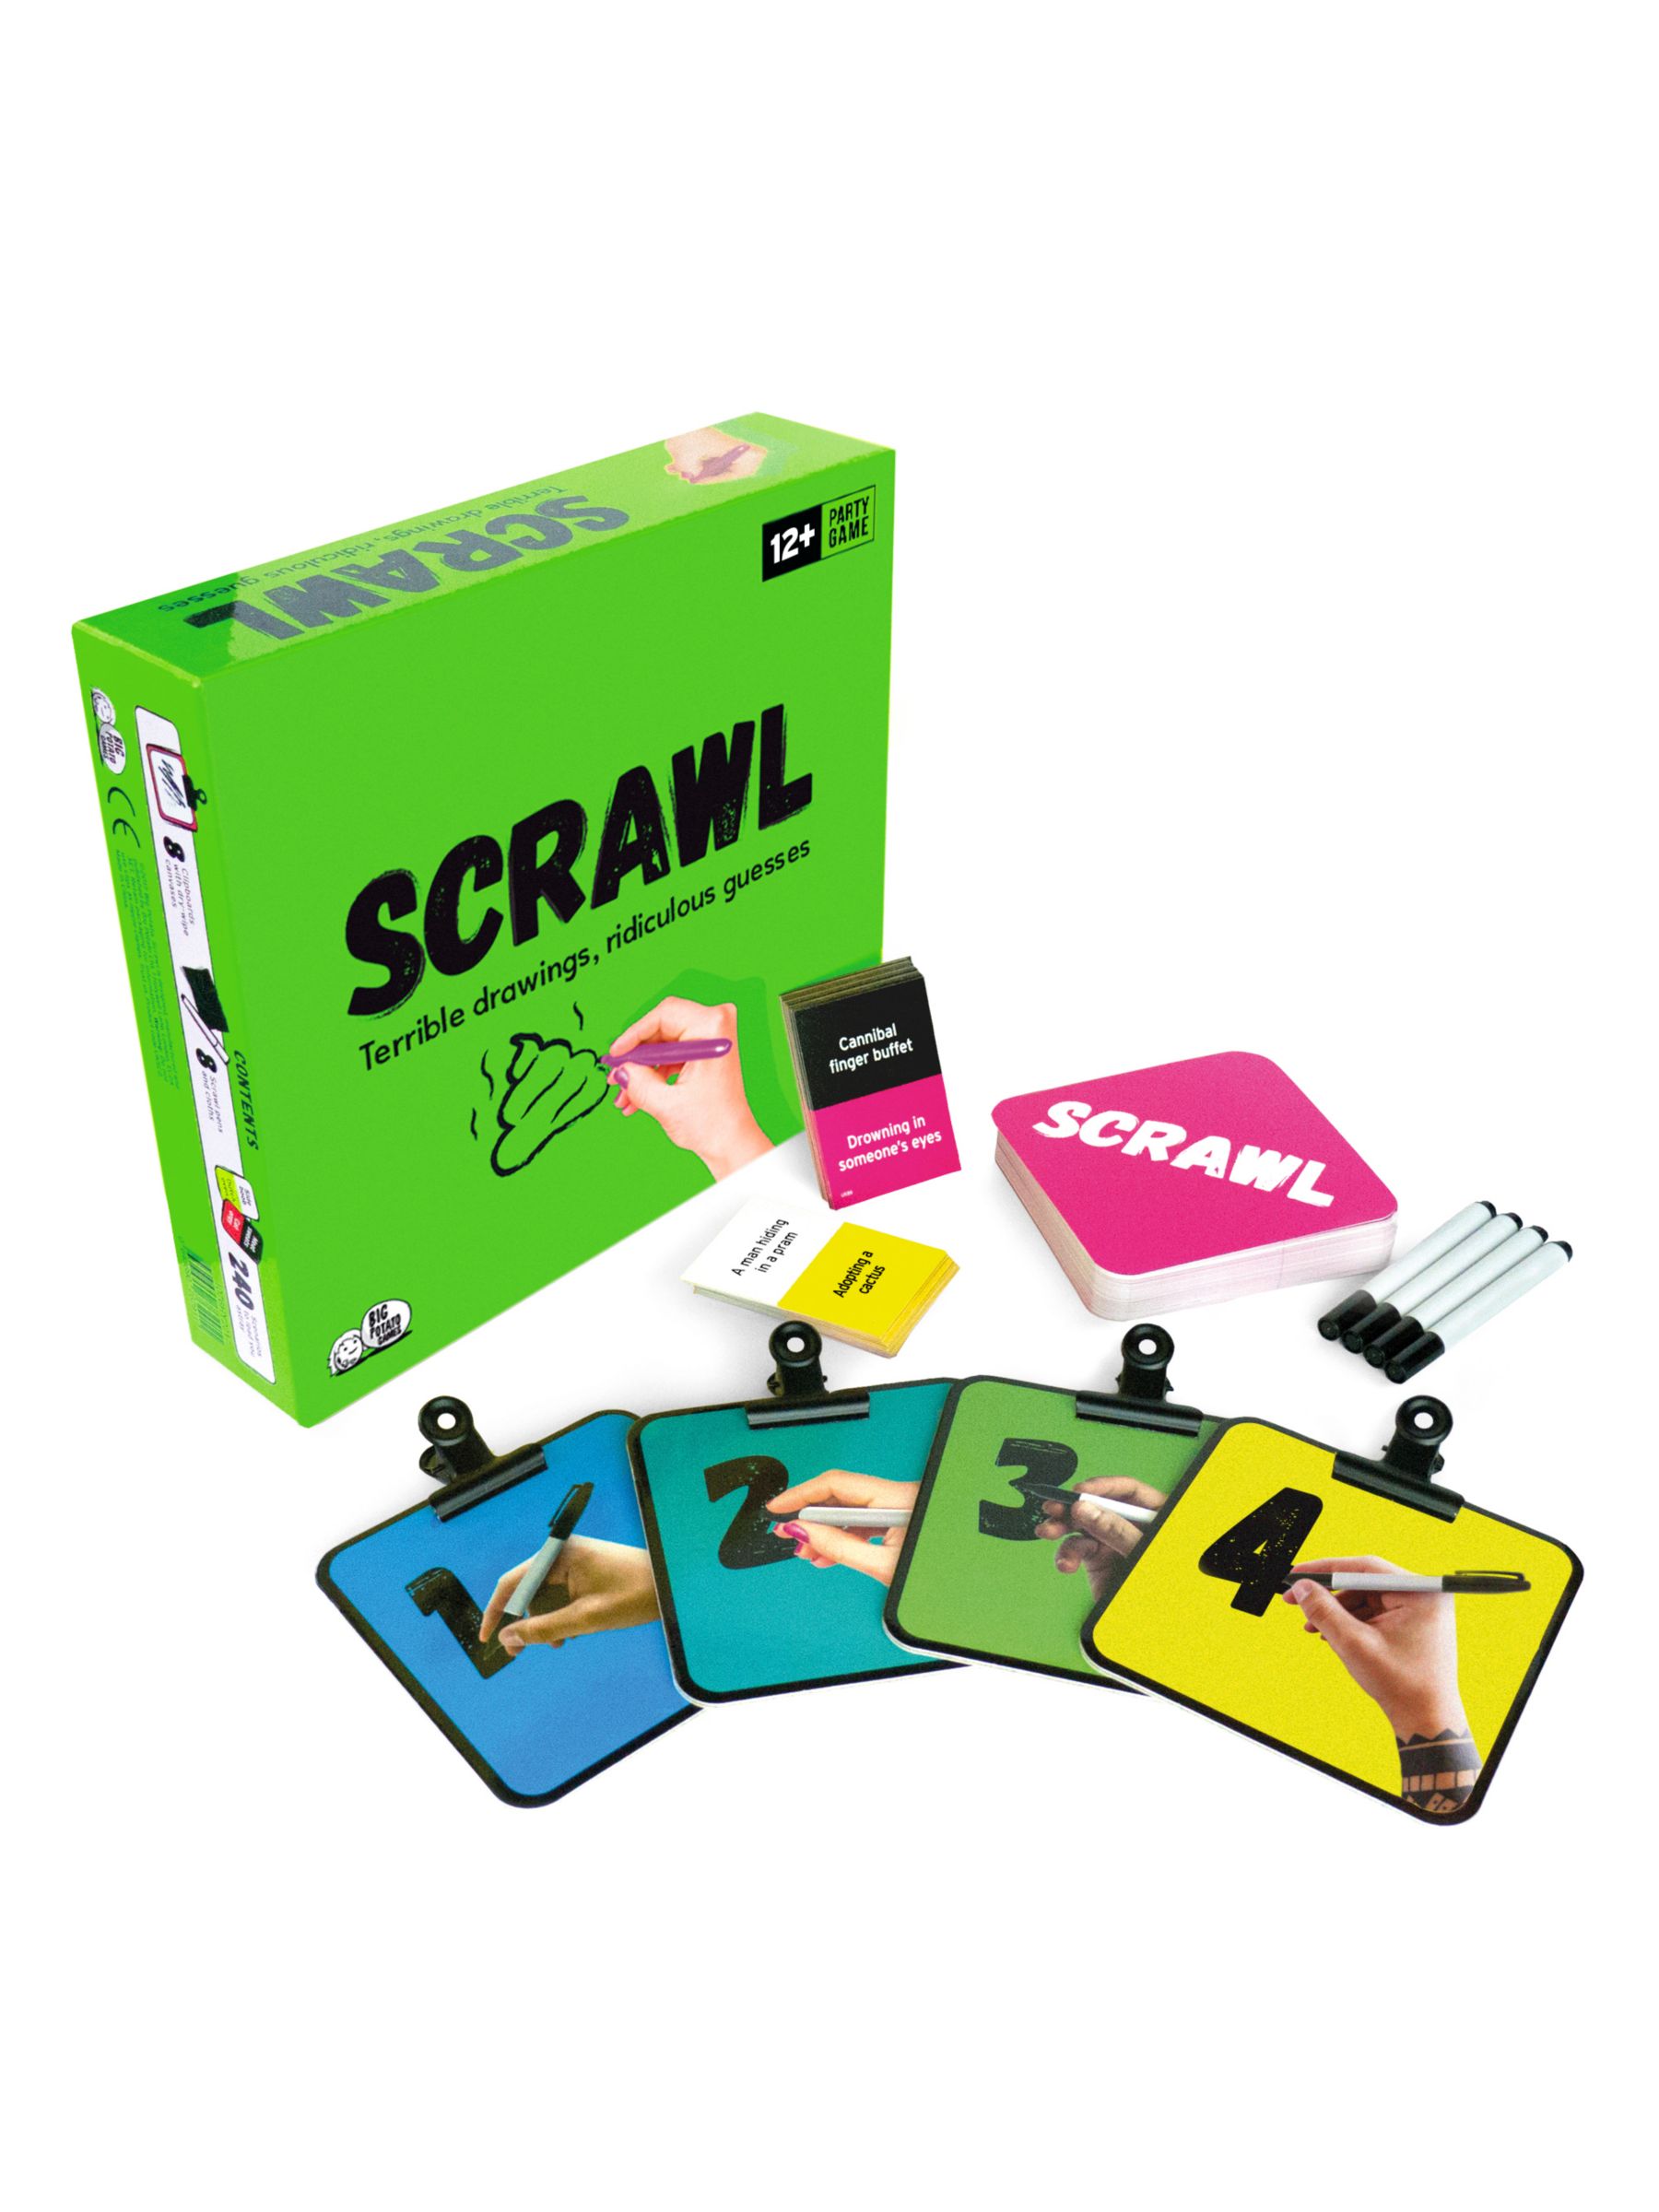 Scrawl Board Game Doodle Your Way To Disaster GW1416 2016 Big Potato Games